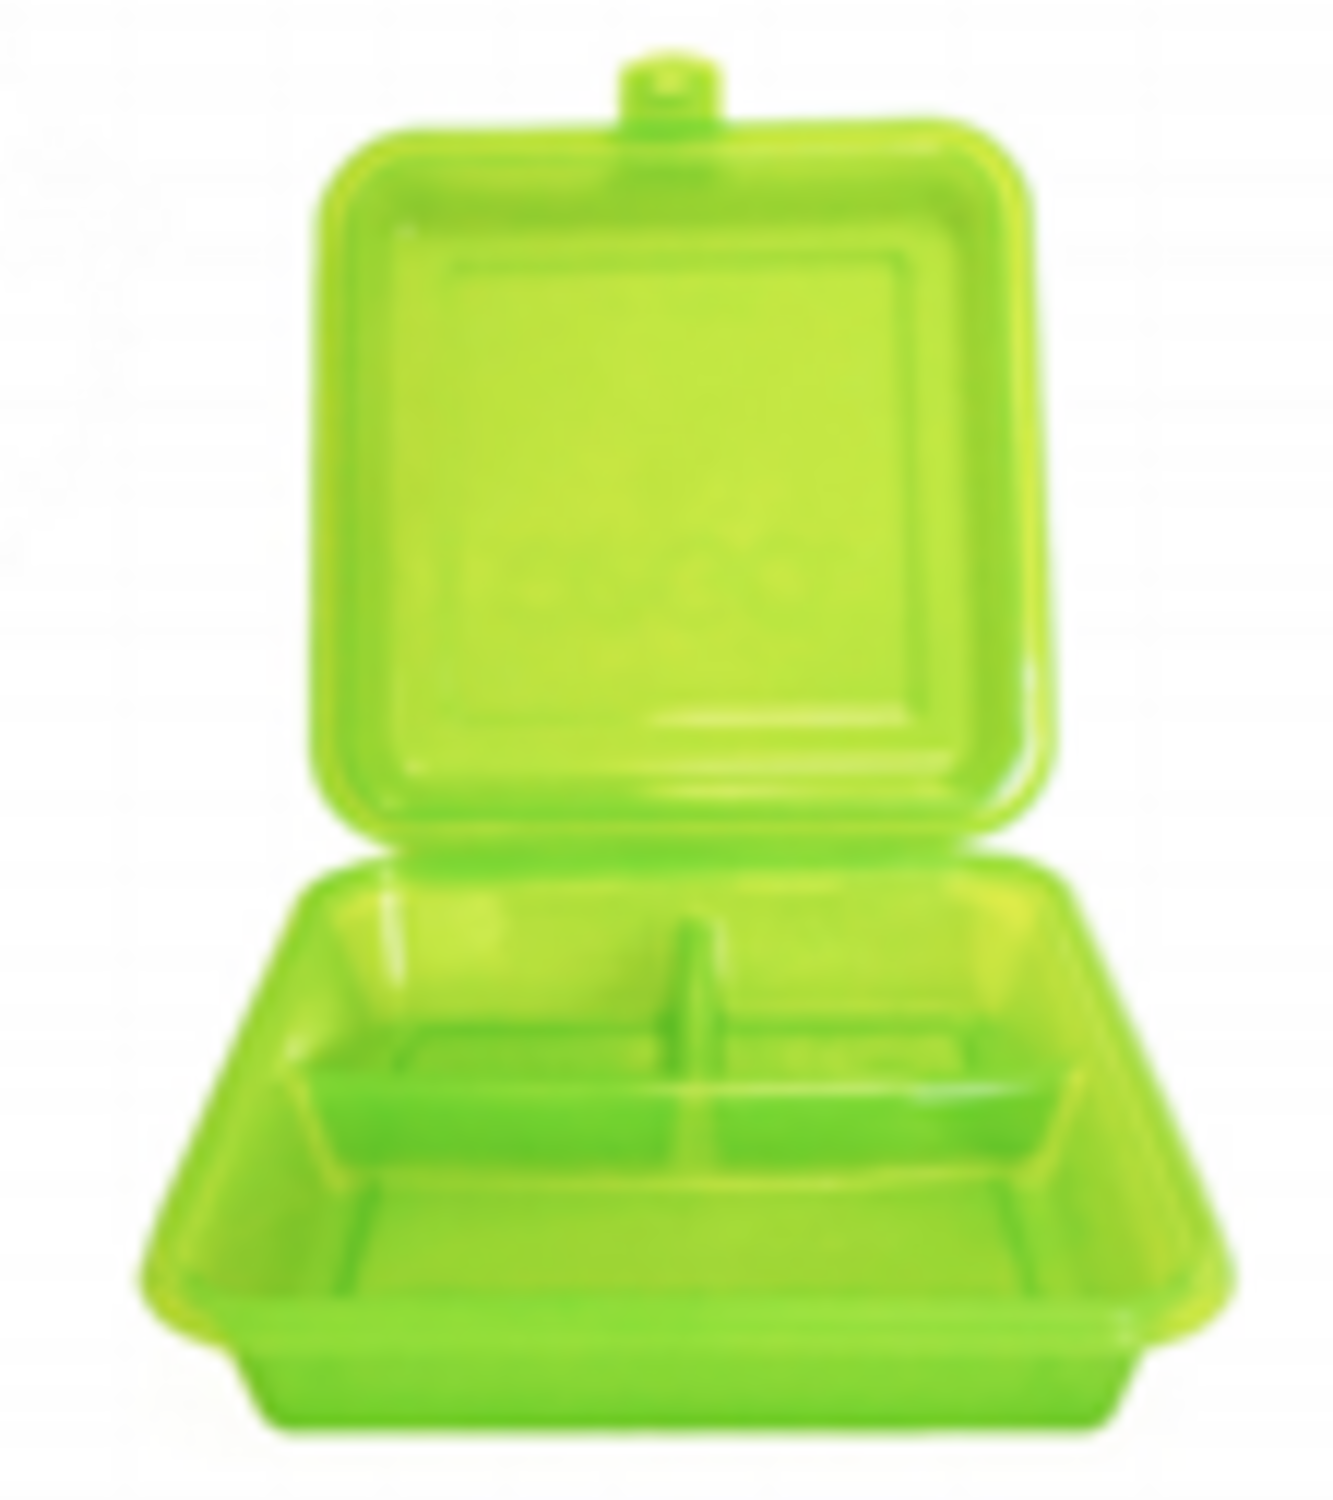 Dining Services Reusable Containers : Office of Student Life